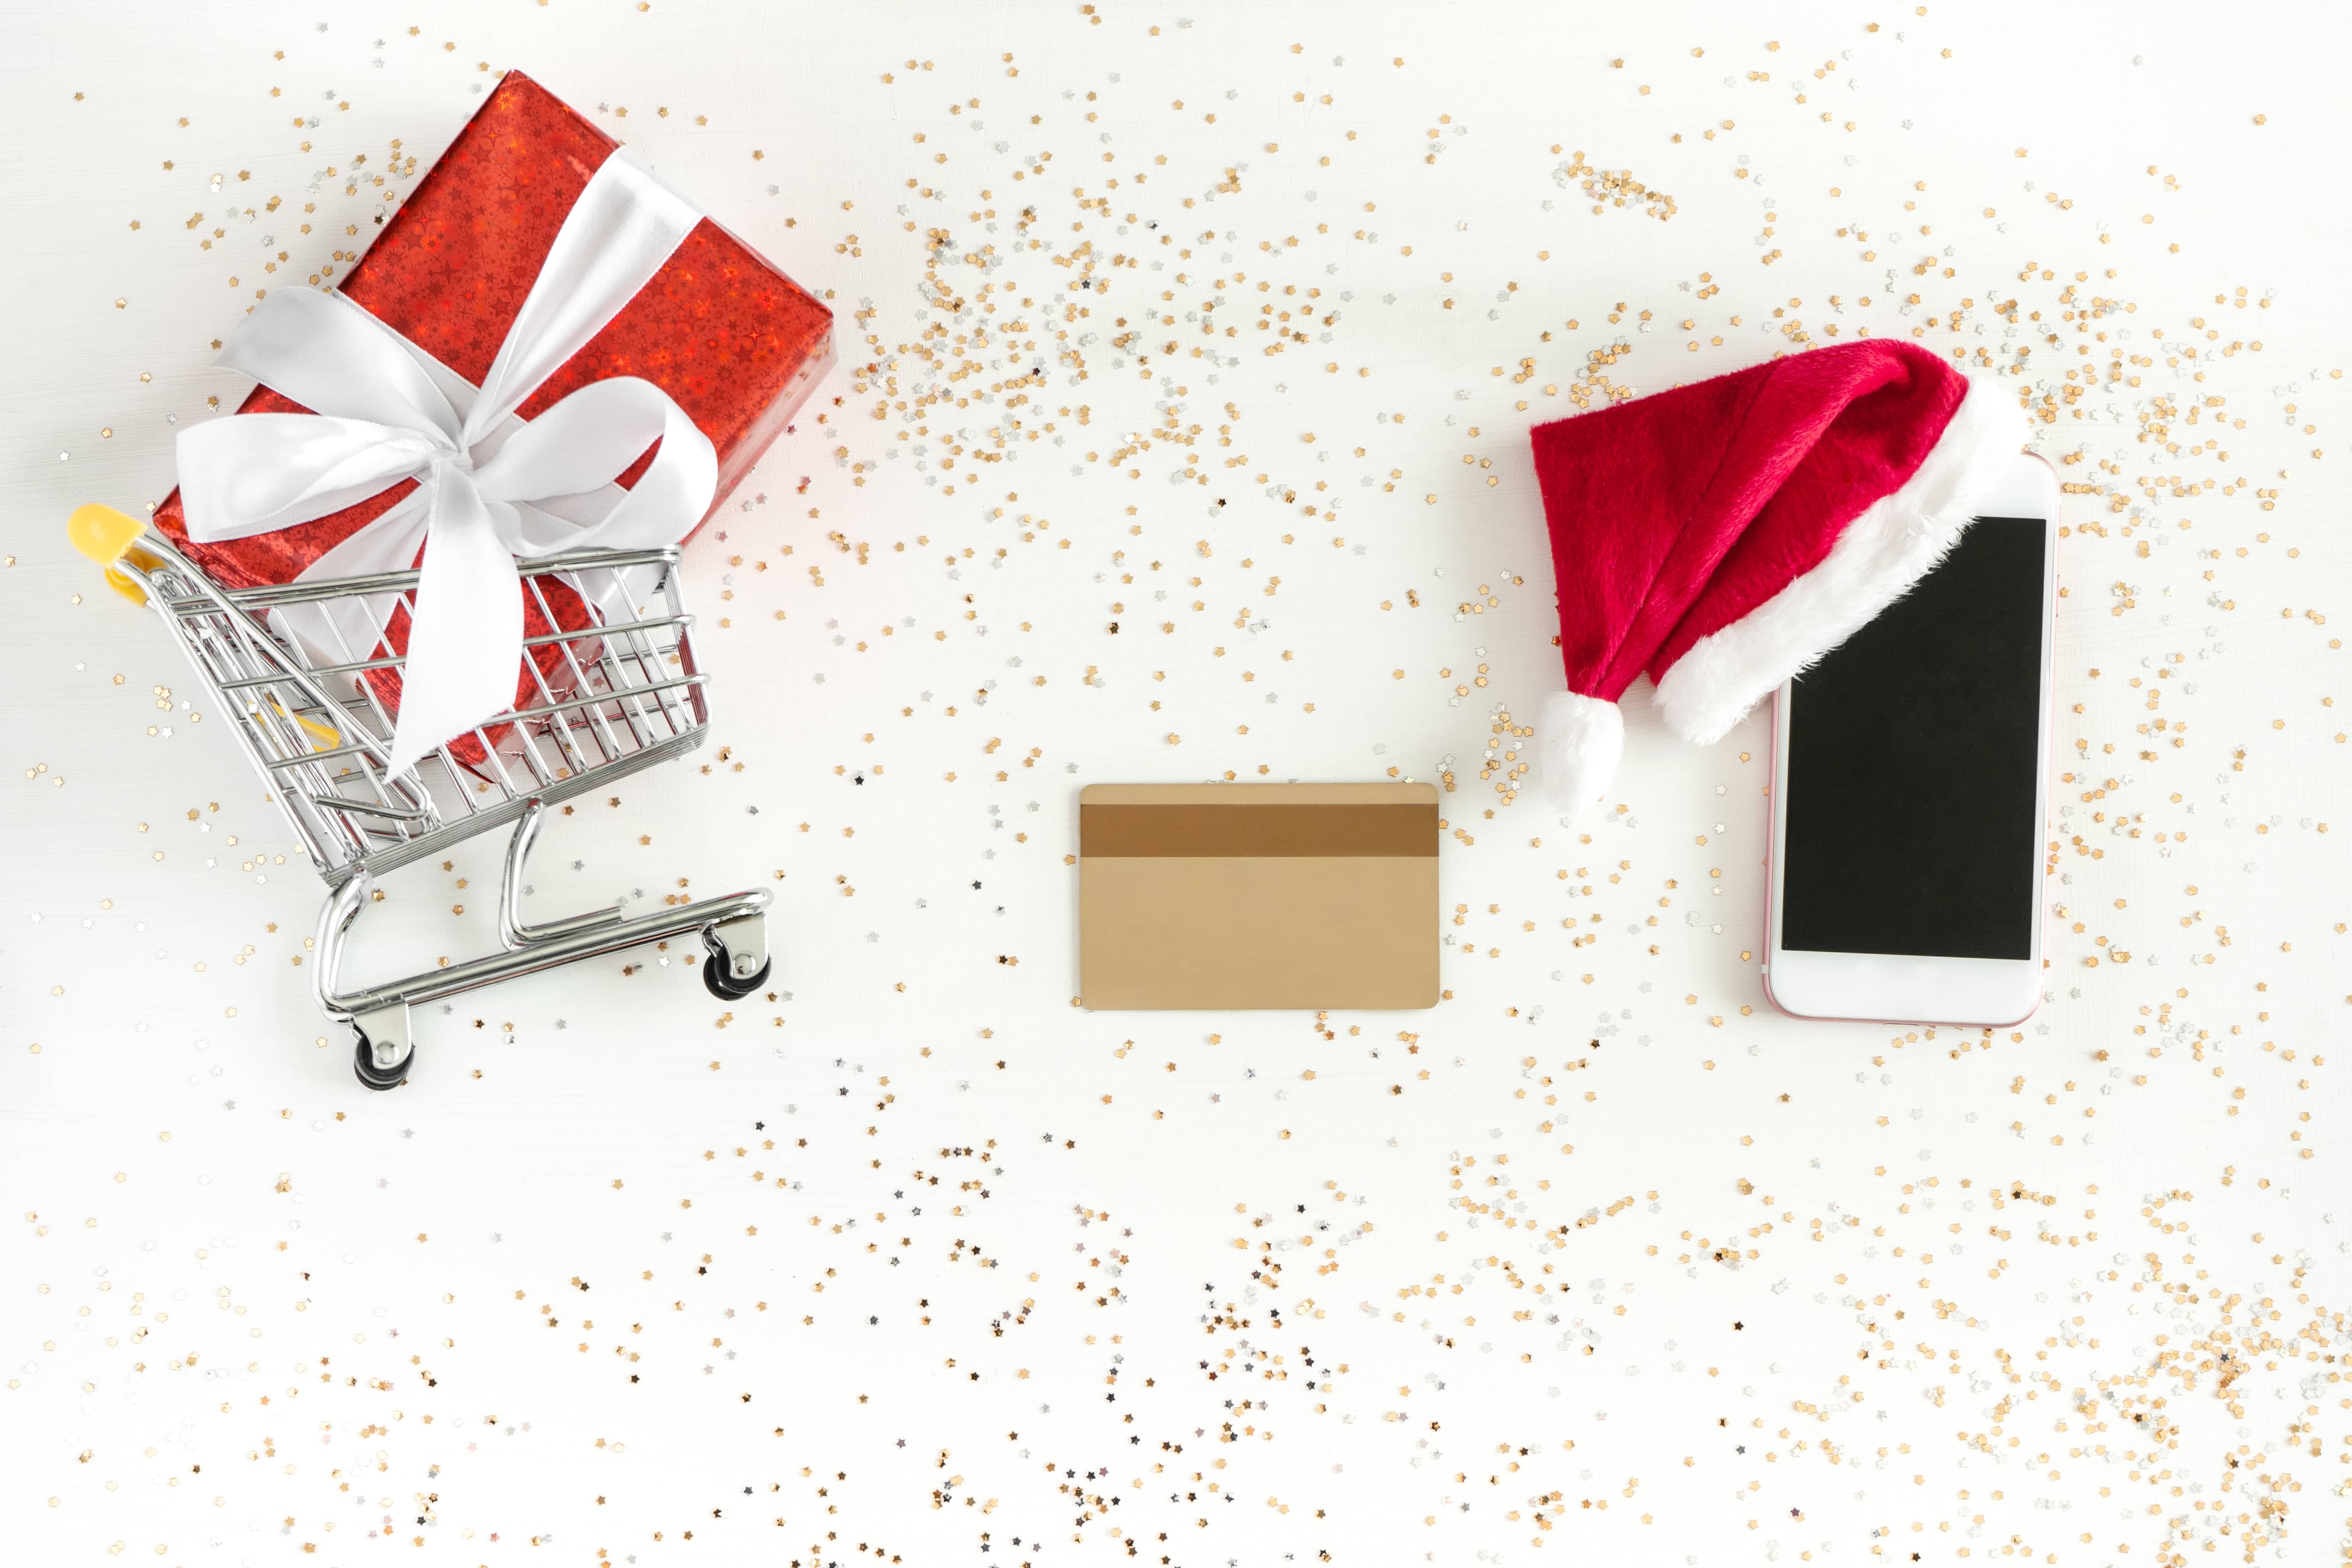 Marketing Trends on Christmas